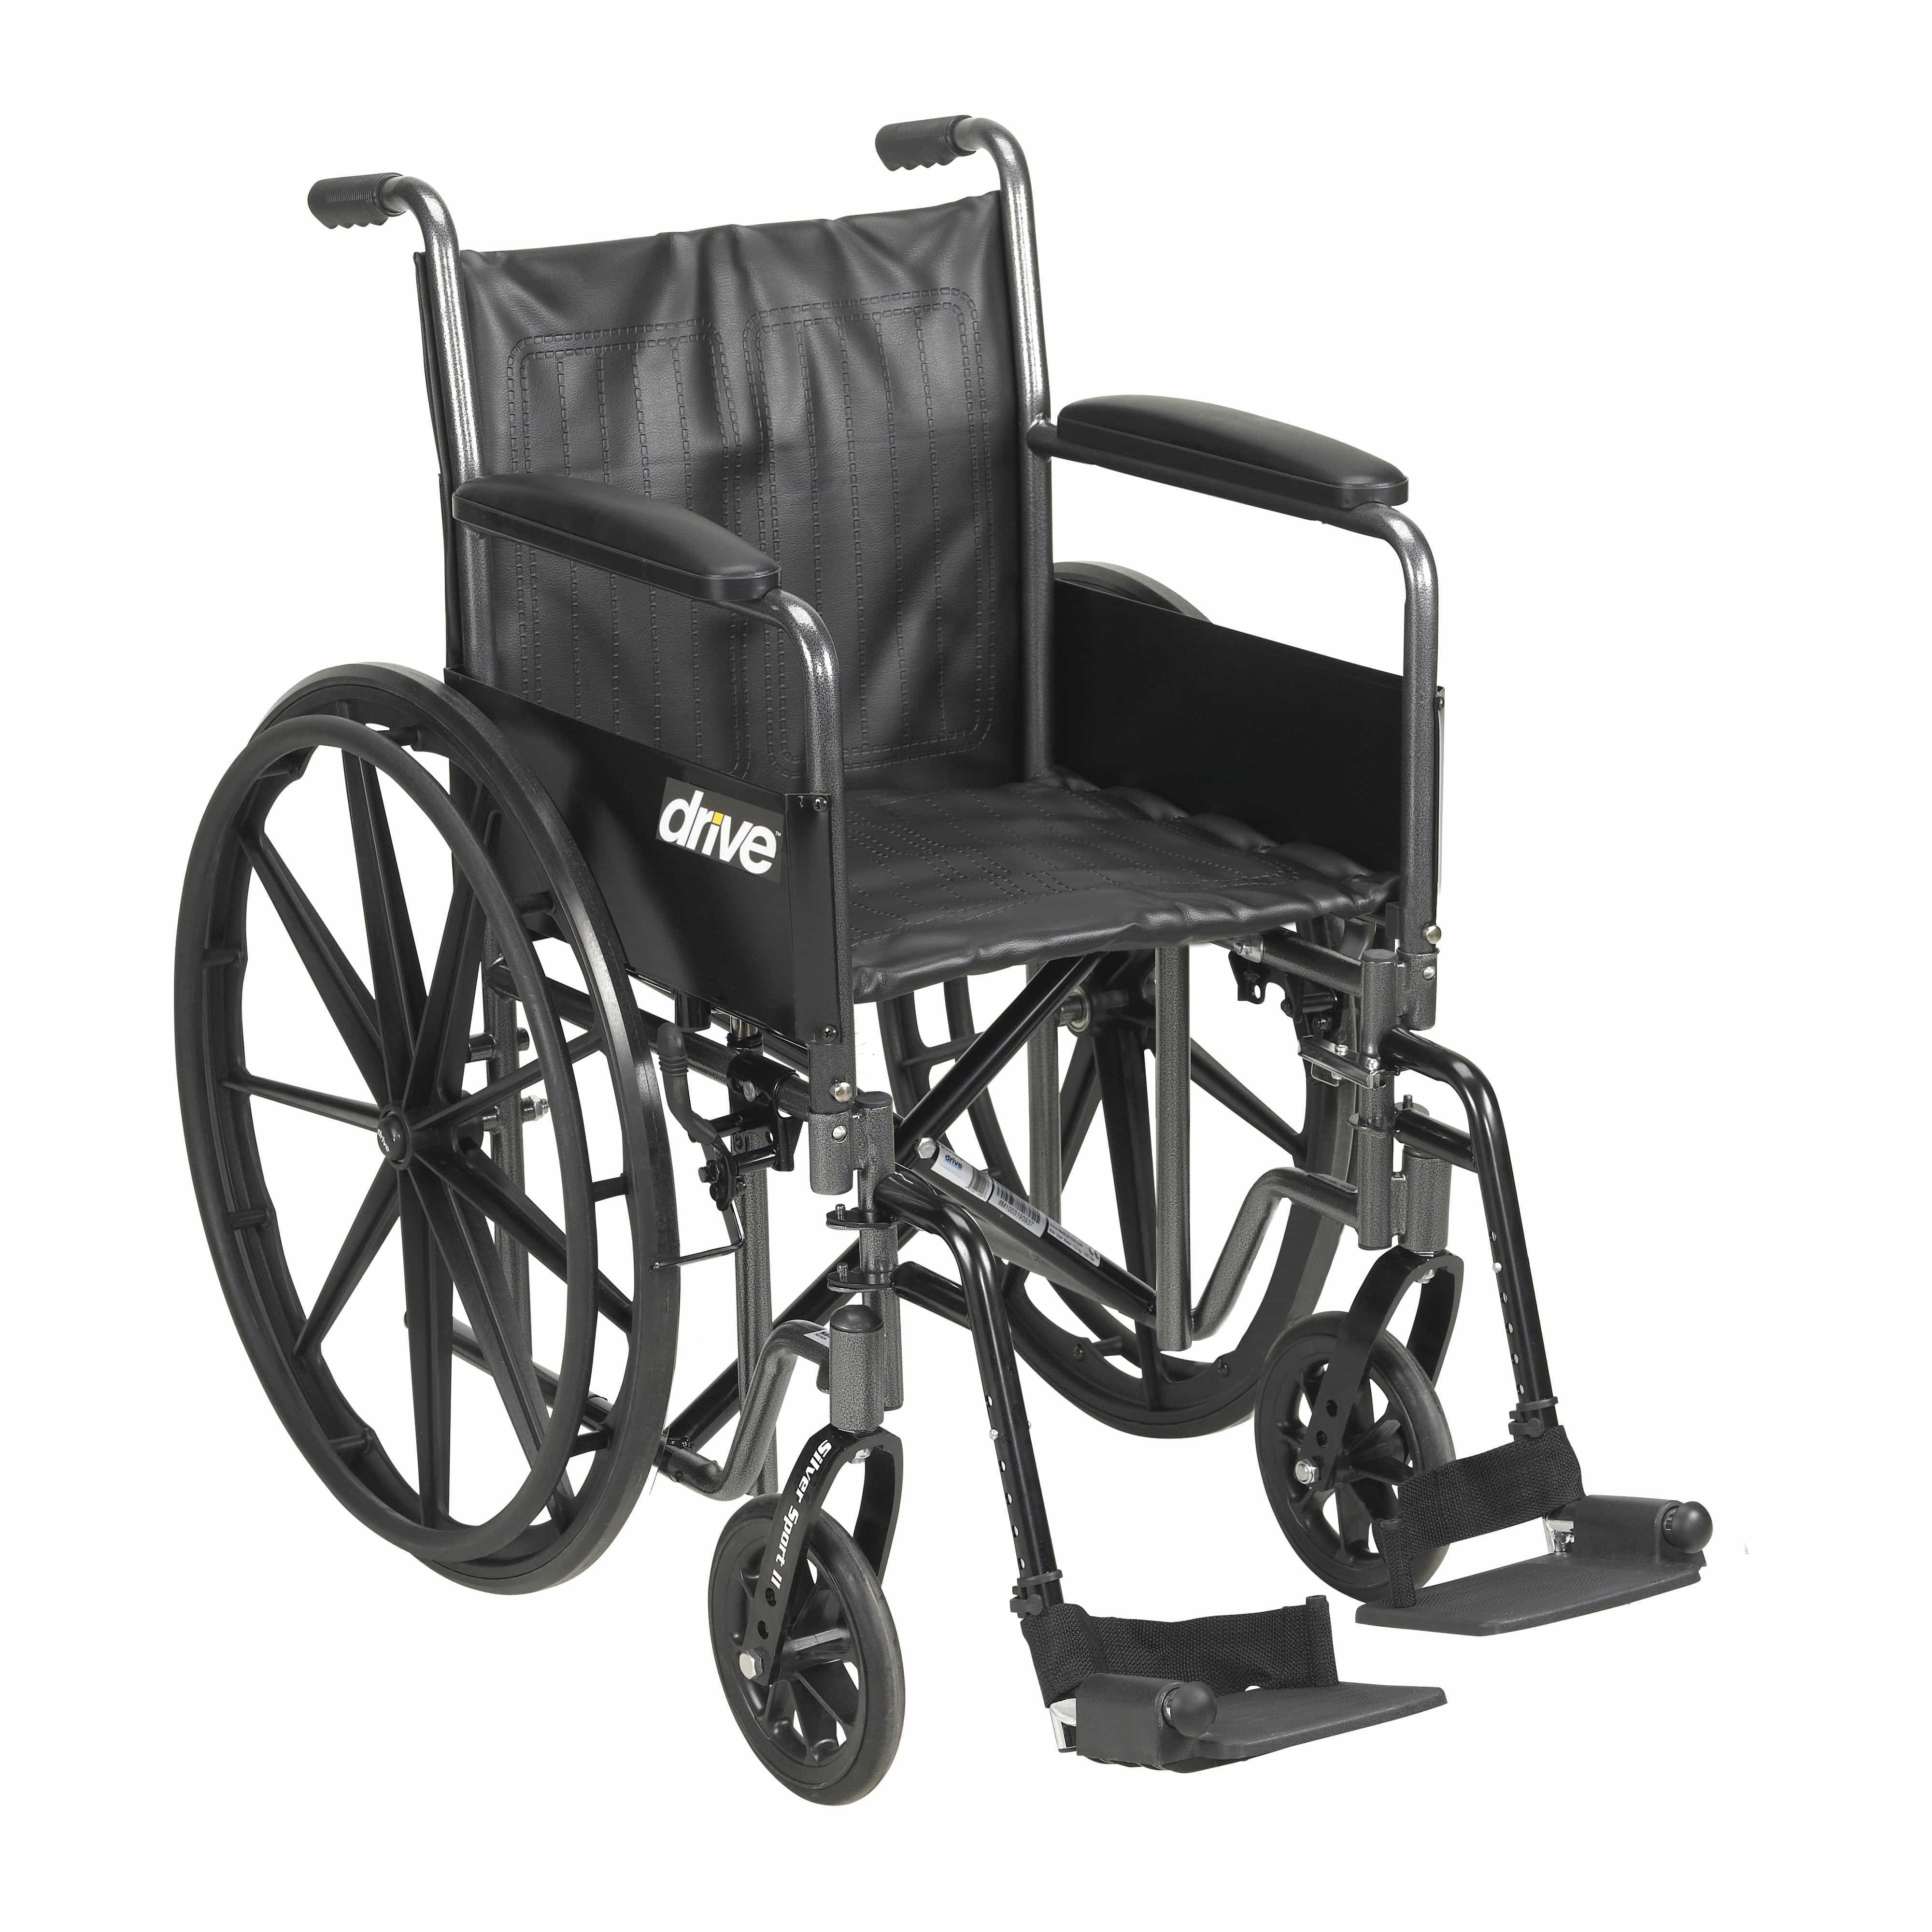 Drive Medical Wheelchairs/Standard Wheelchairs Detachable Full Arms and Swing away Footrests / 18" Seat Drive Medical Silver Sport 2 Wheelchair